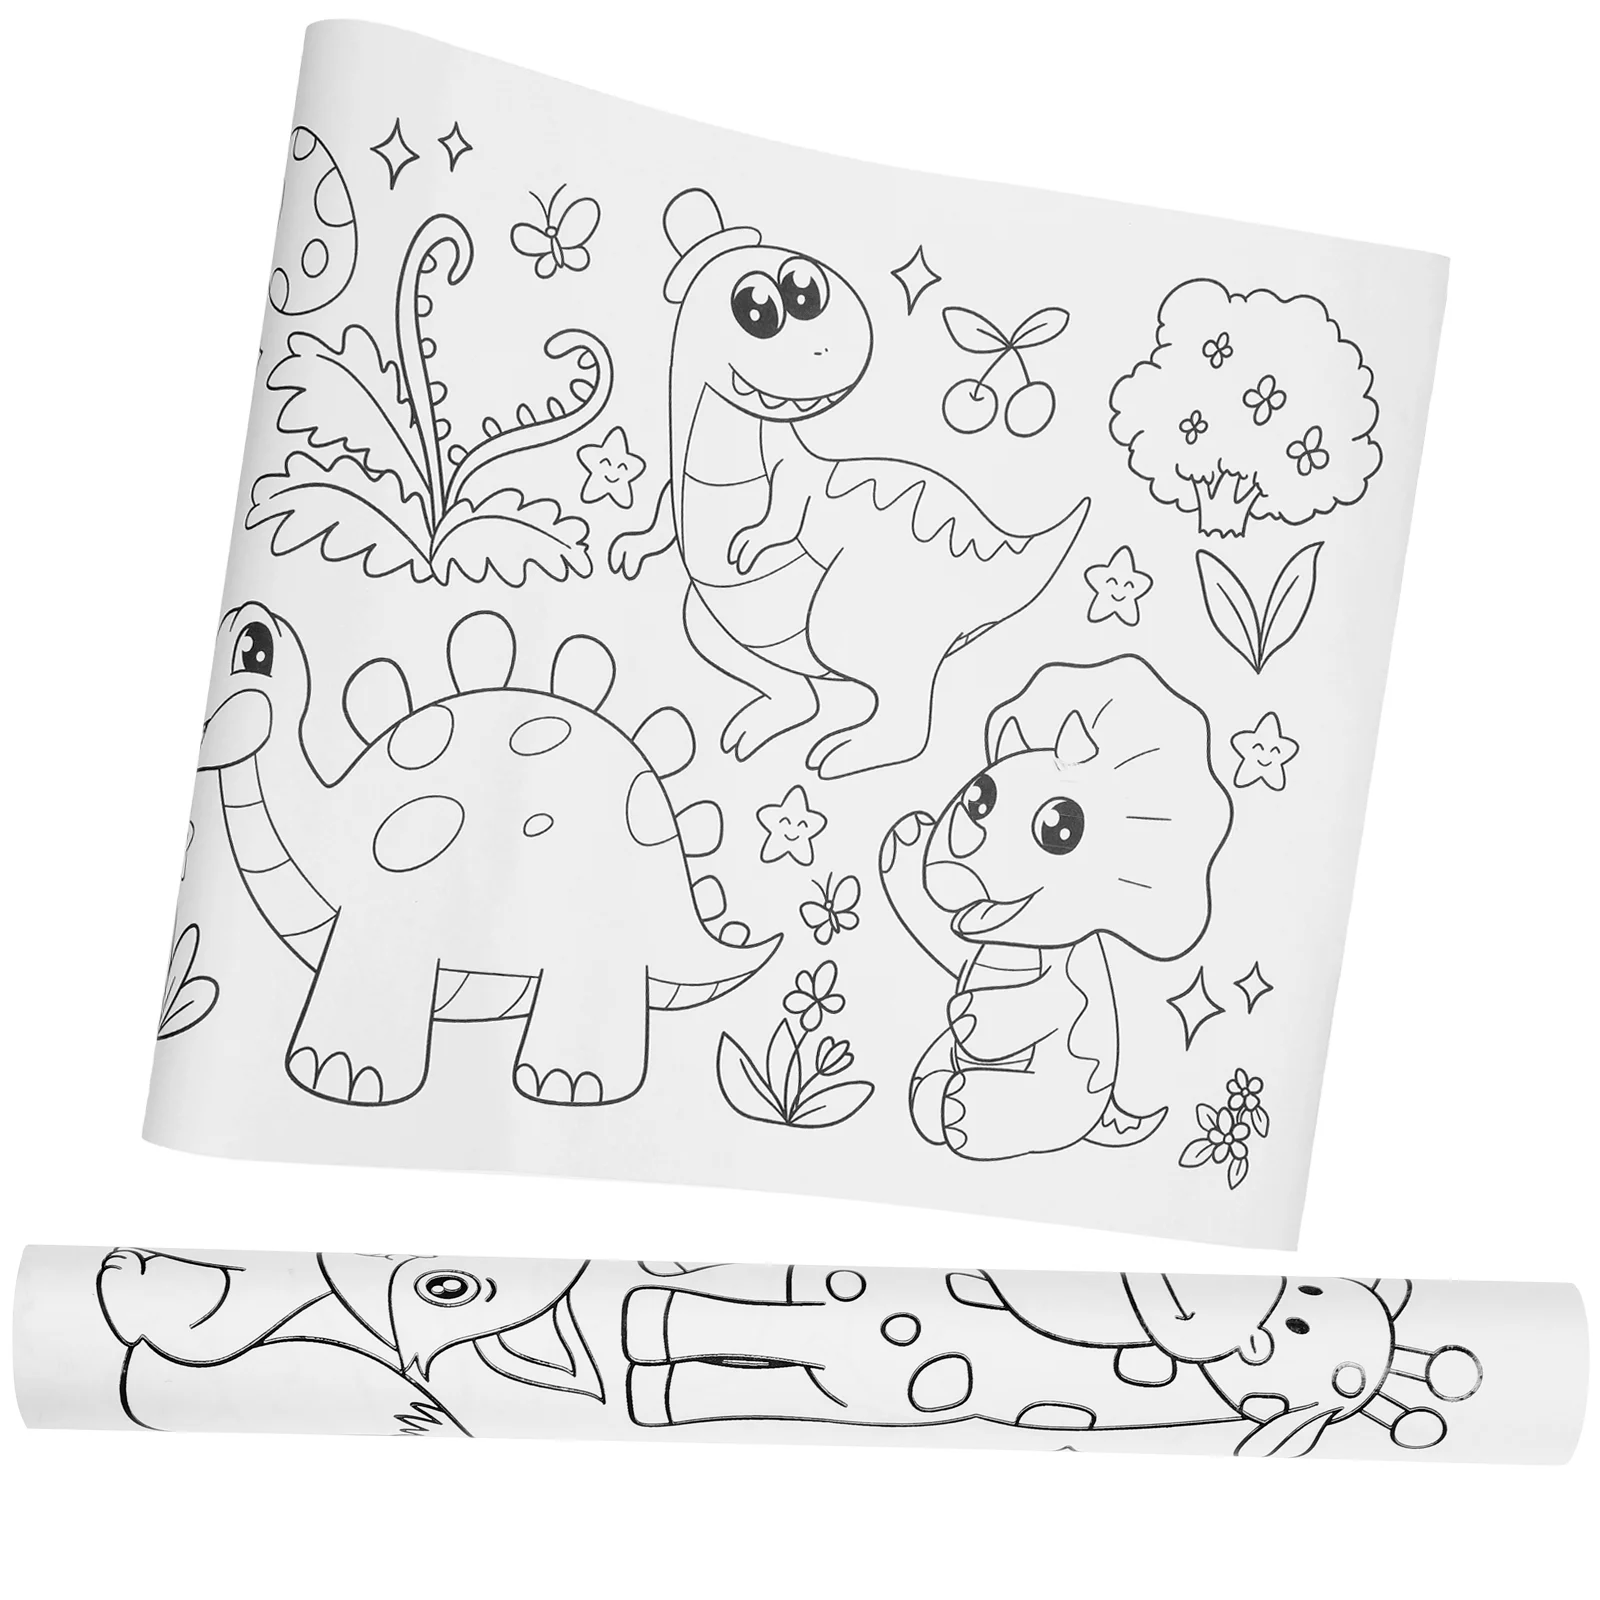 2 Rolls Animal Drawing Paper Jungle Poster Kids Color Filling Colouring Sheet Birthday Gift Coloring Books Large